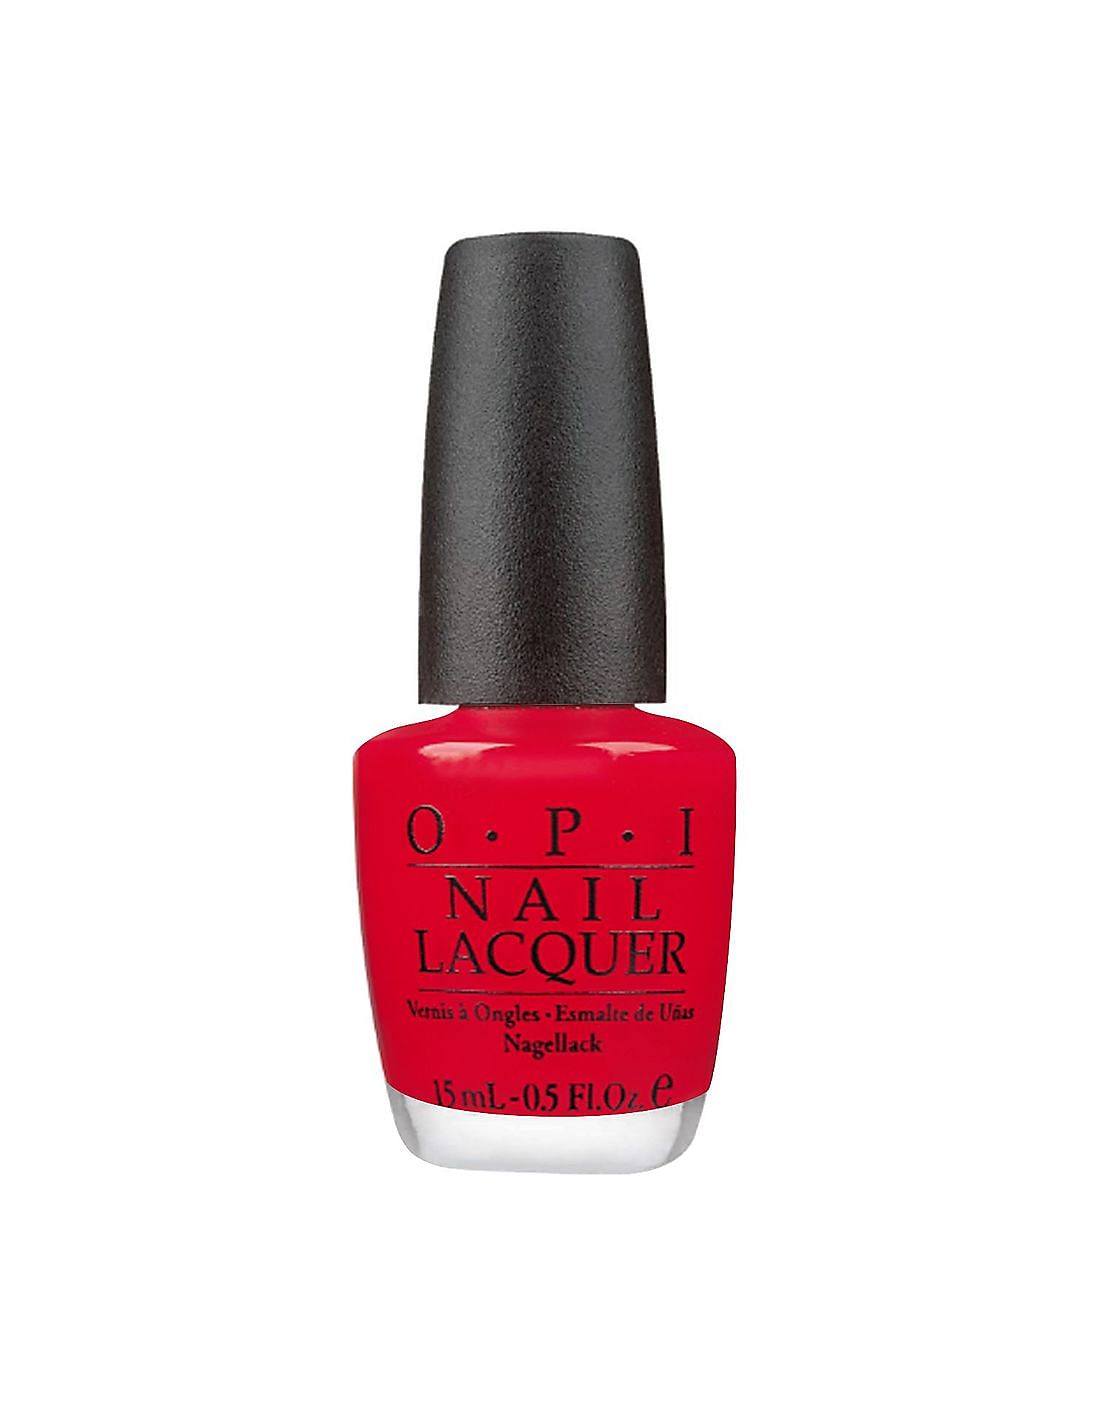 OPI Glossy Finish Nail Lacquer  Big Apple Red  15 ml  LongLasting  Glossy Nail Polish  Fast Drying Chip Resistant  Amazonin Beauty